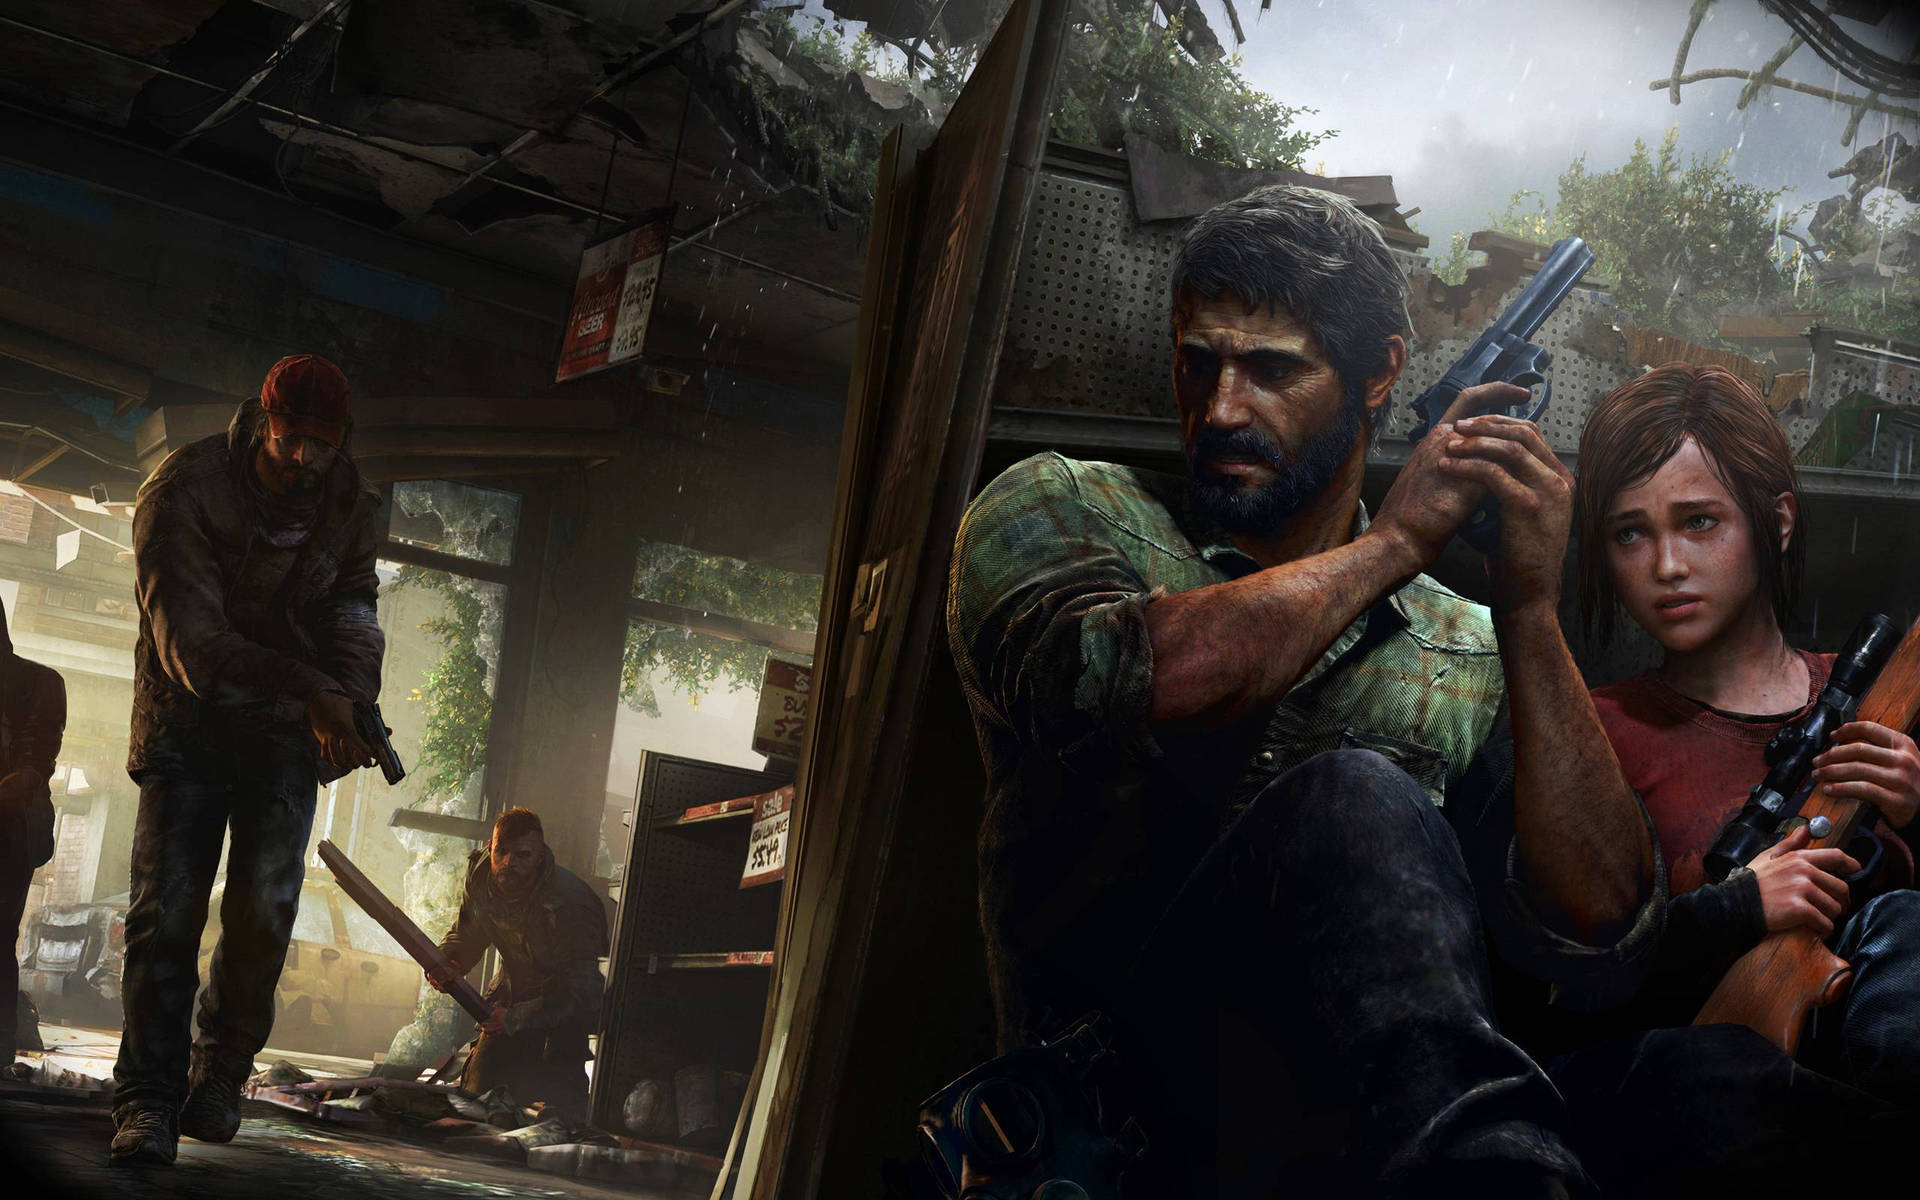 Taking cover against an unknown enemy in The Last Of Us Wallpaper